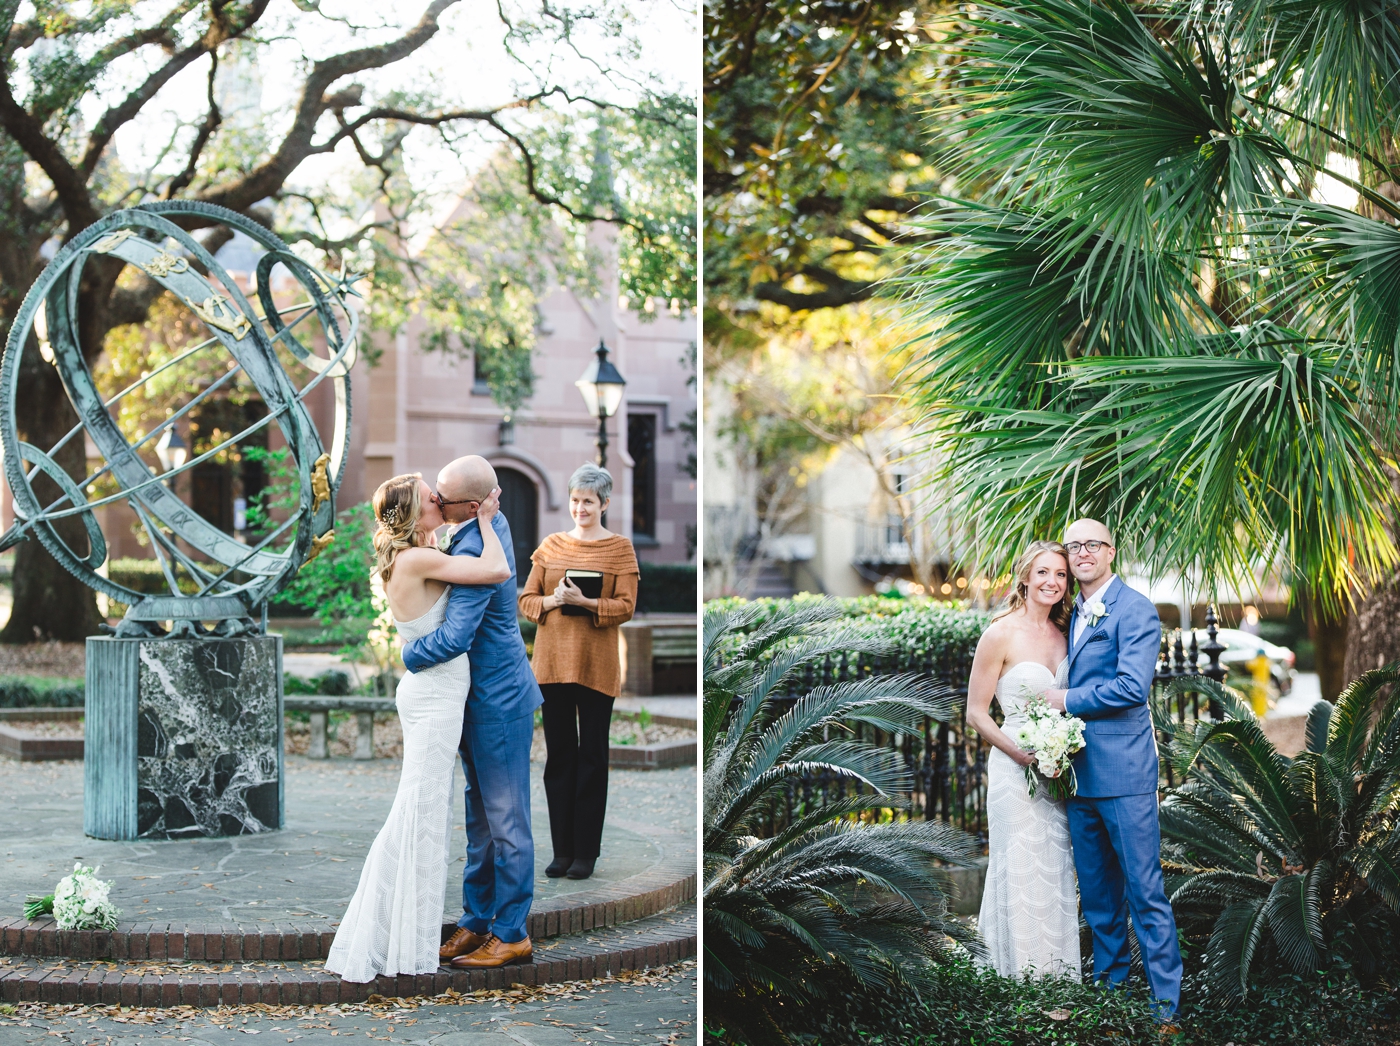 Tips For Planning a Savannah Elopement